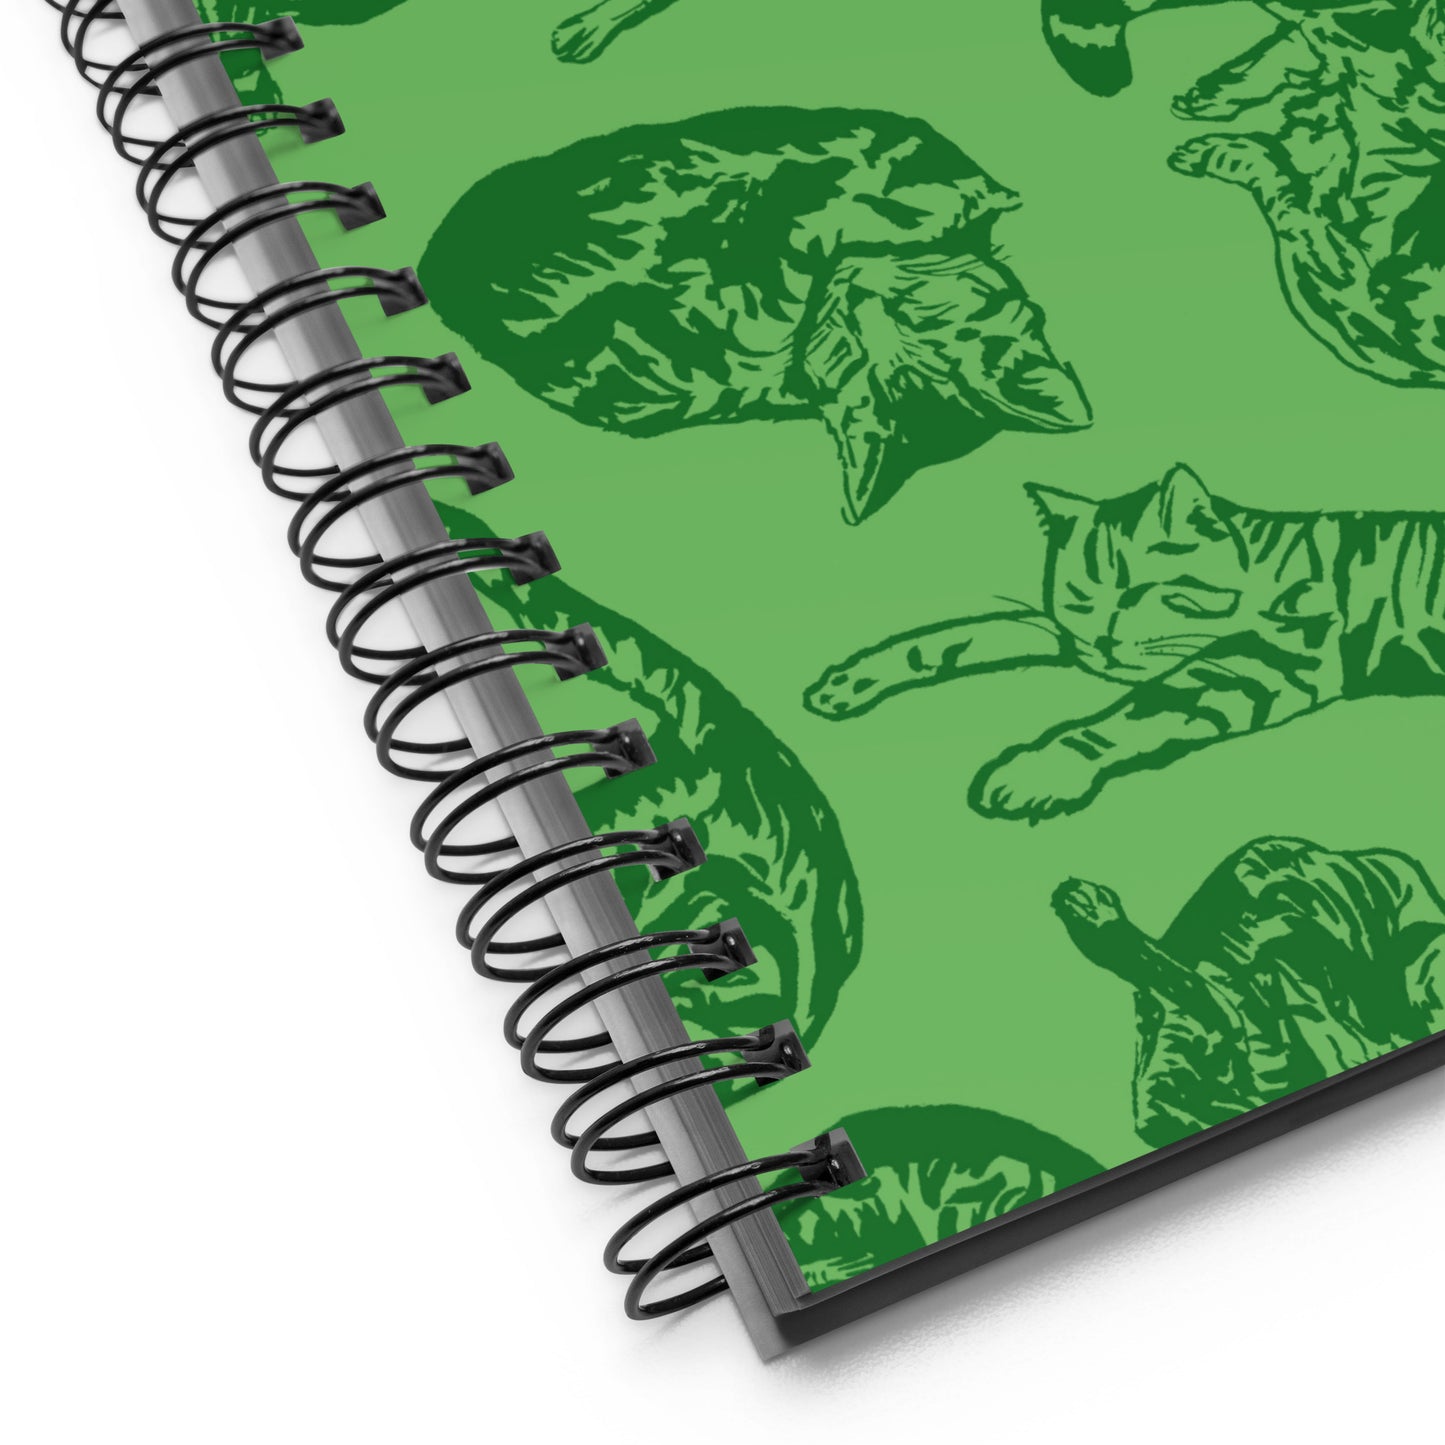 Punk Rock Pussy Toile Spiral Notebook